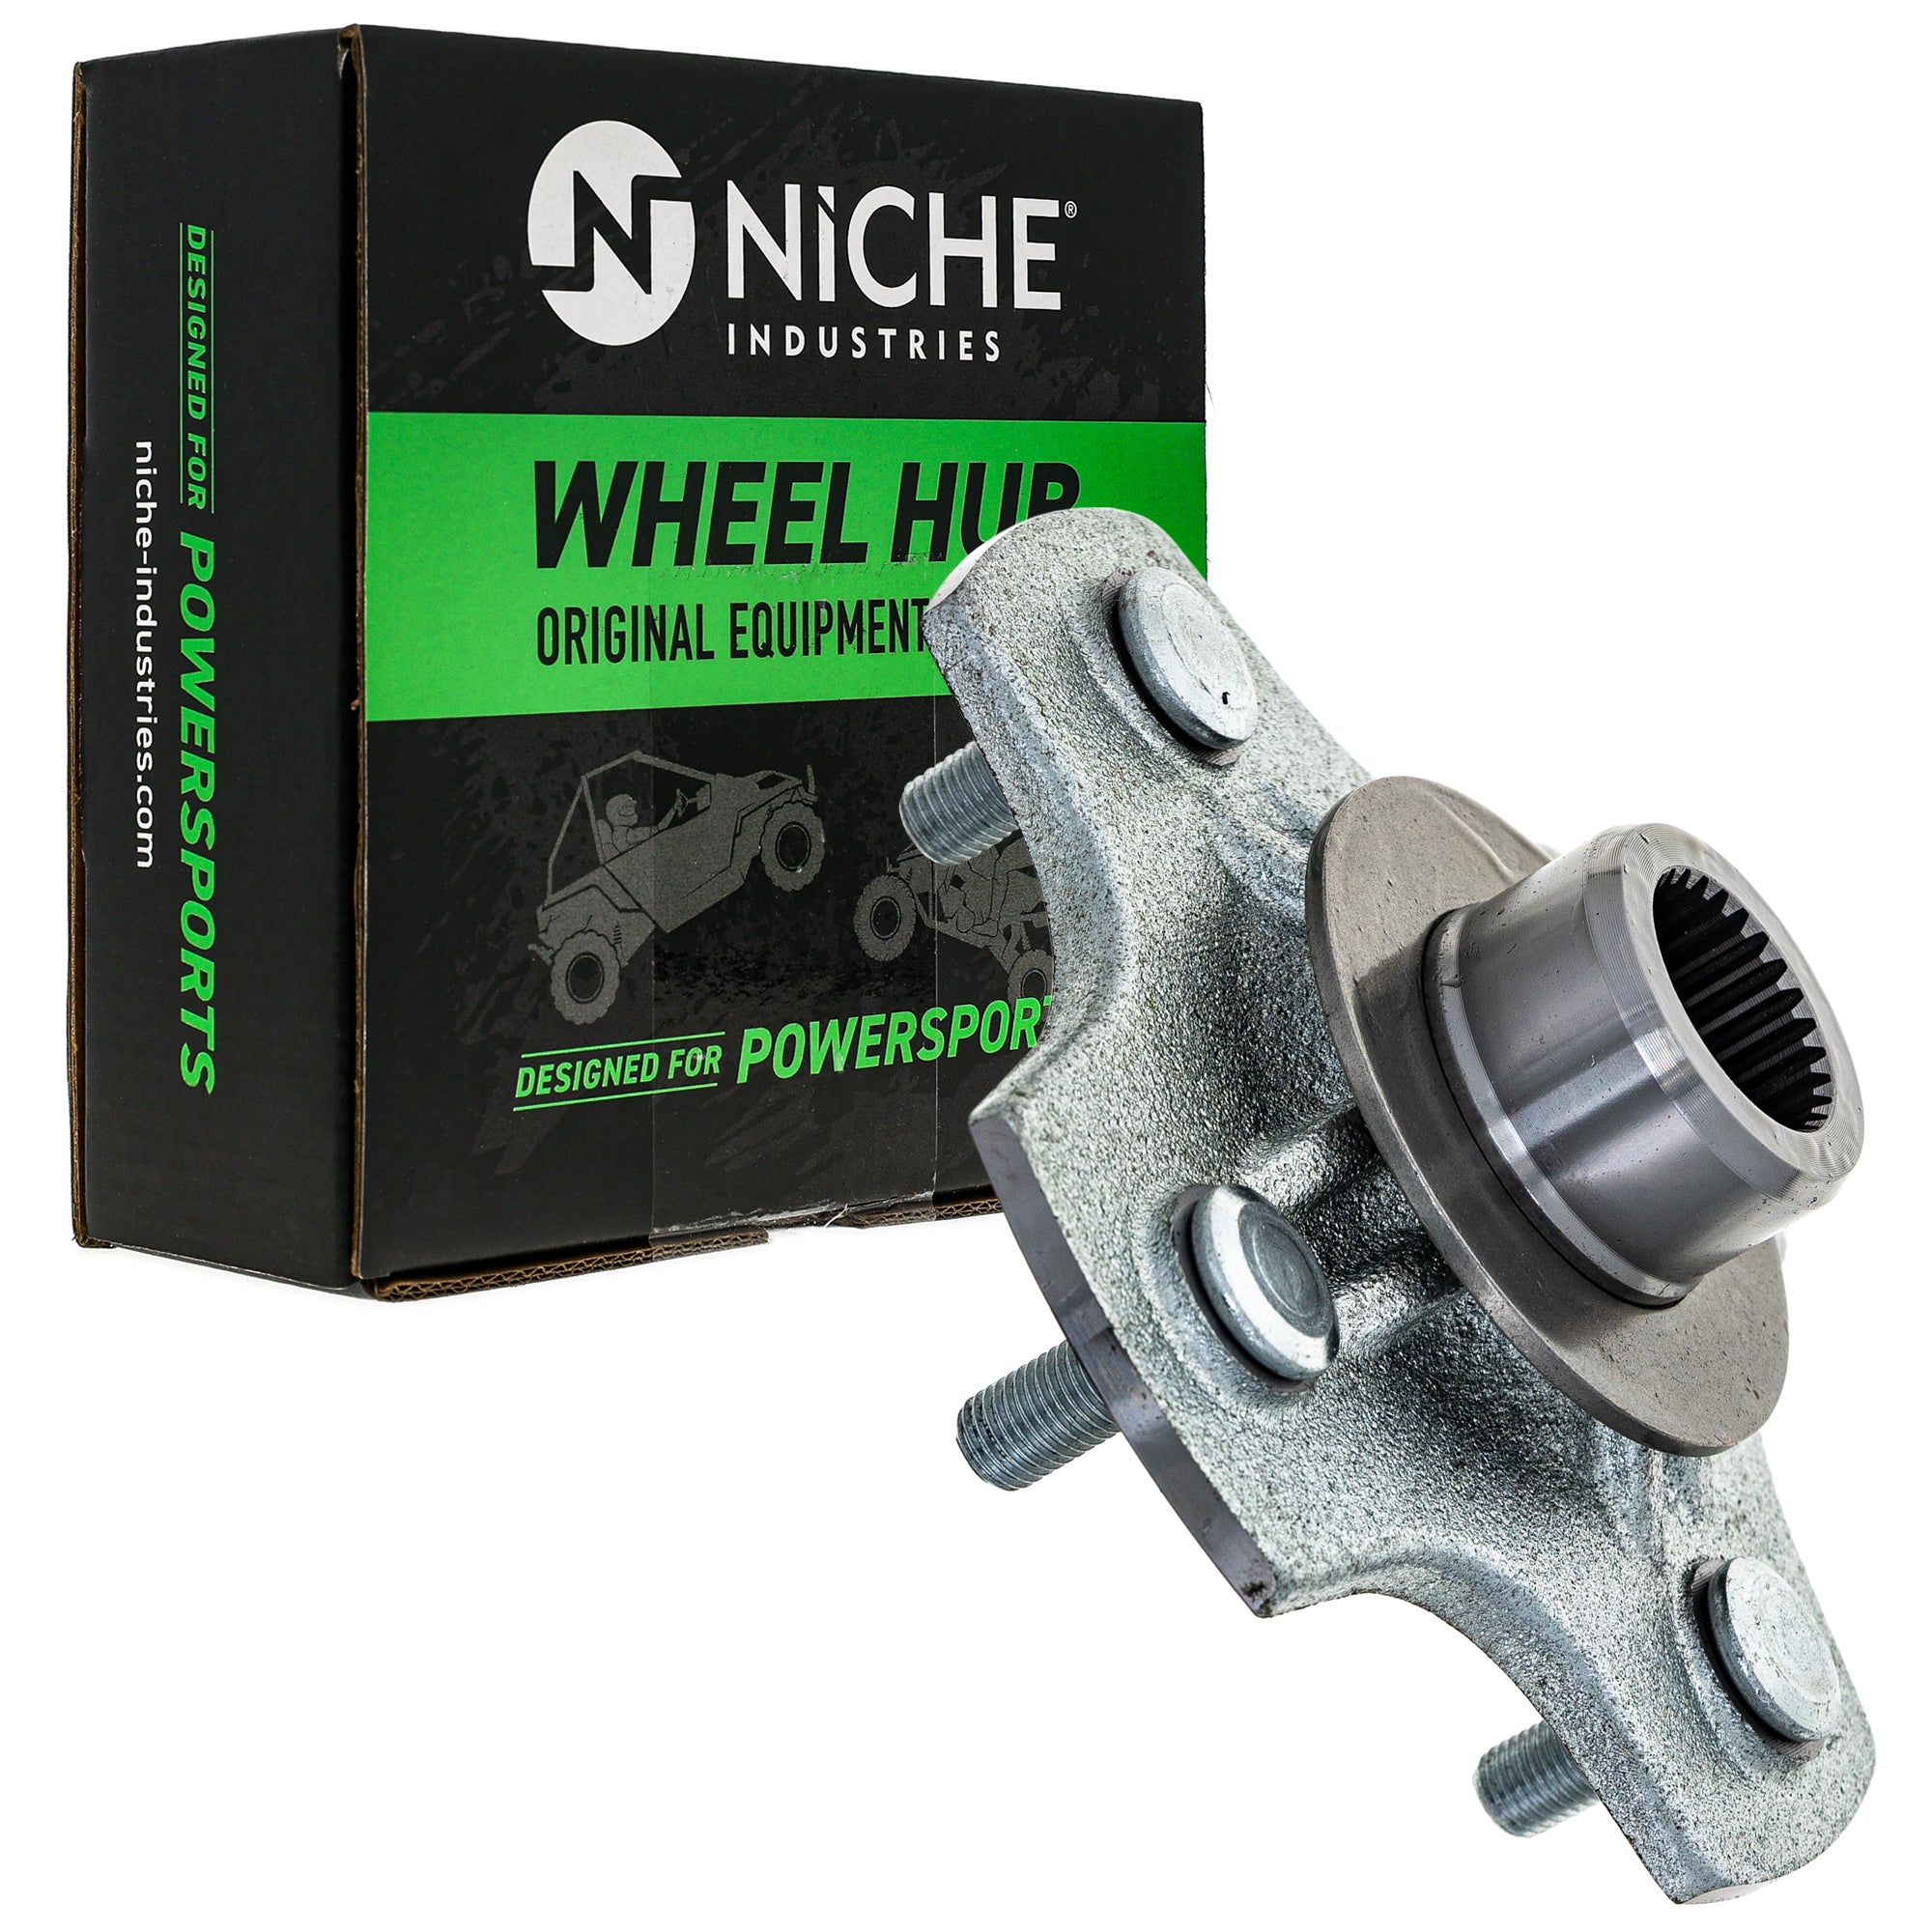 NICHE 519-CWH-2228B Wheel Hub for zOTHER Rancher FourTrax Foreman